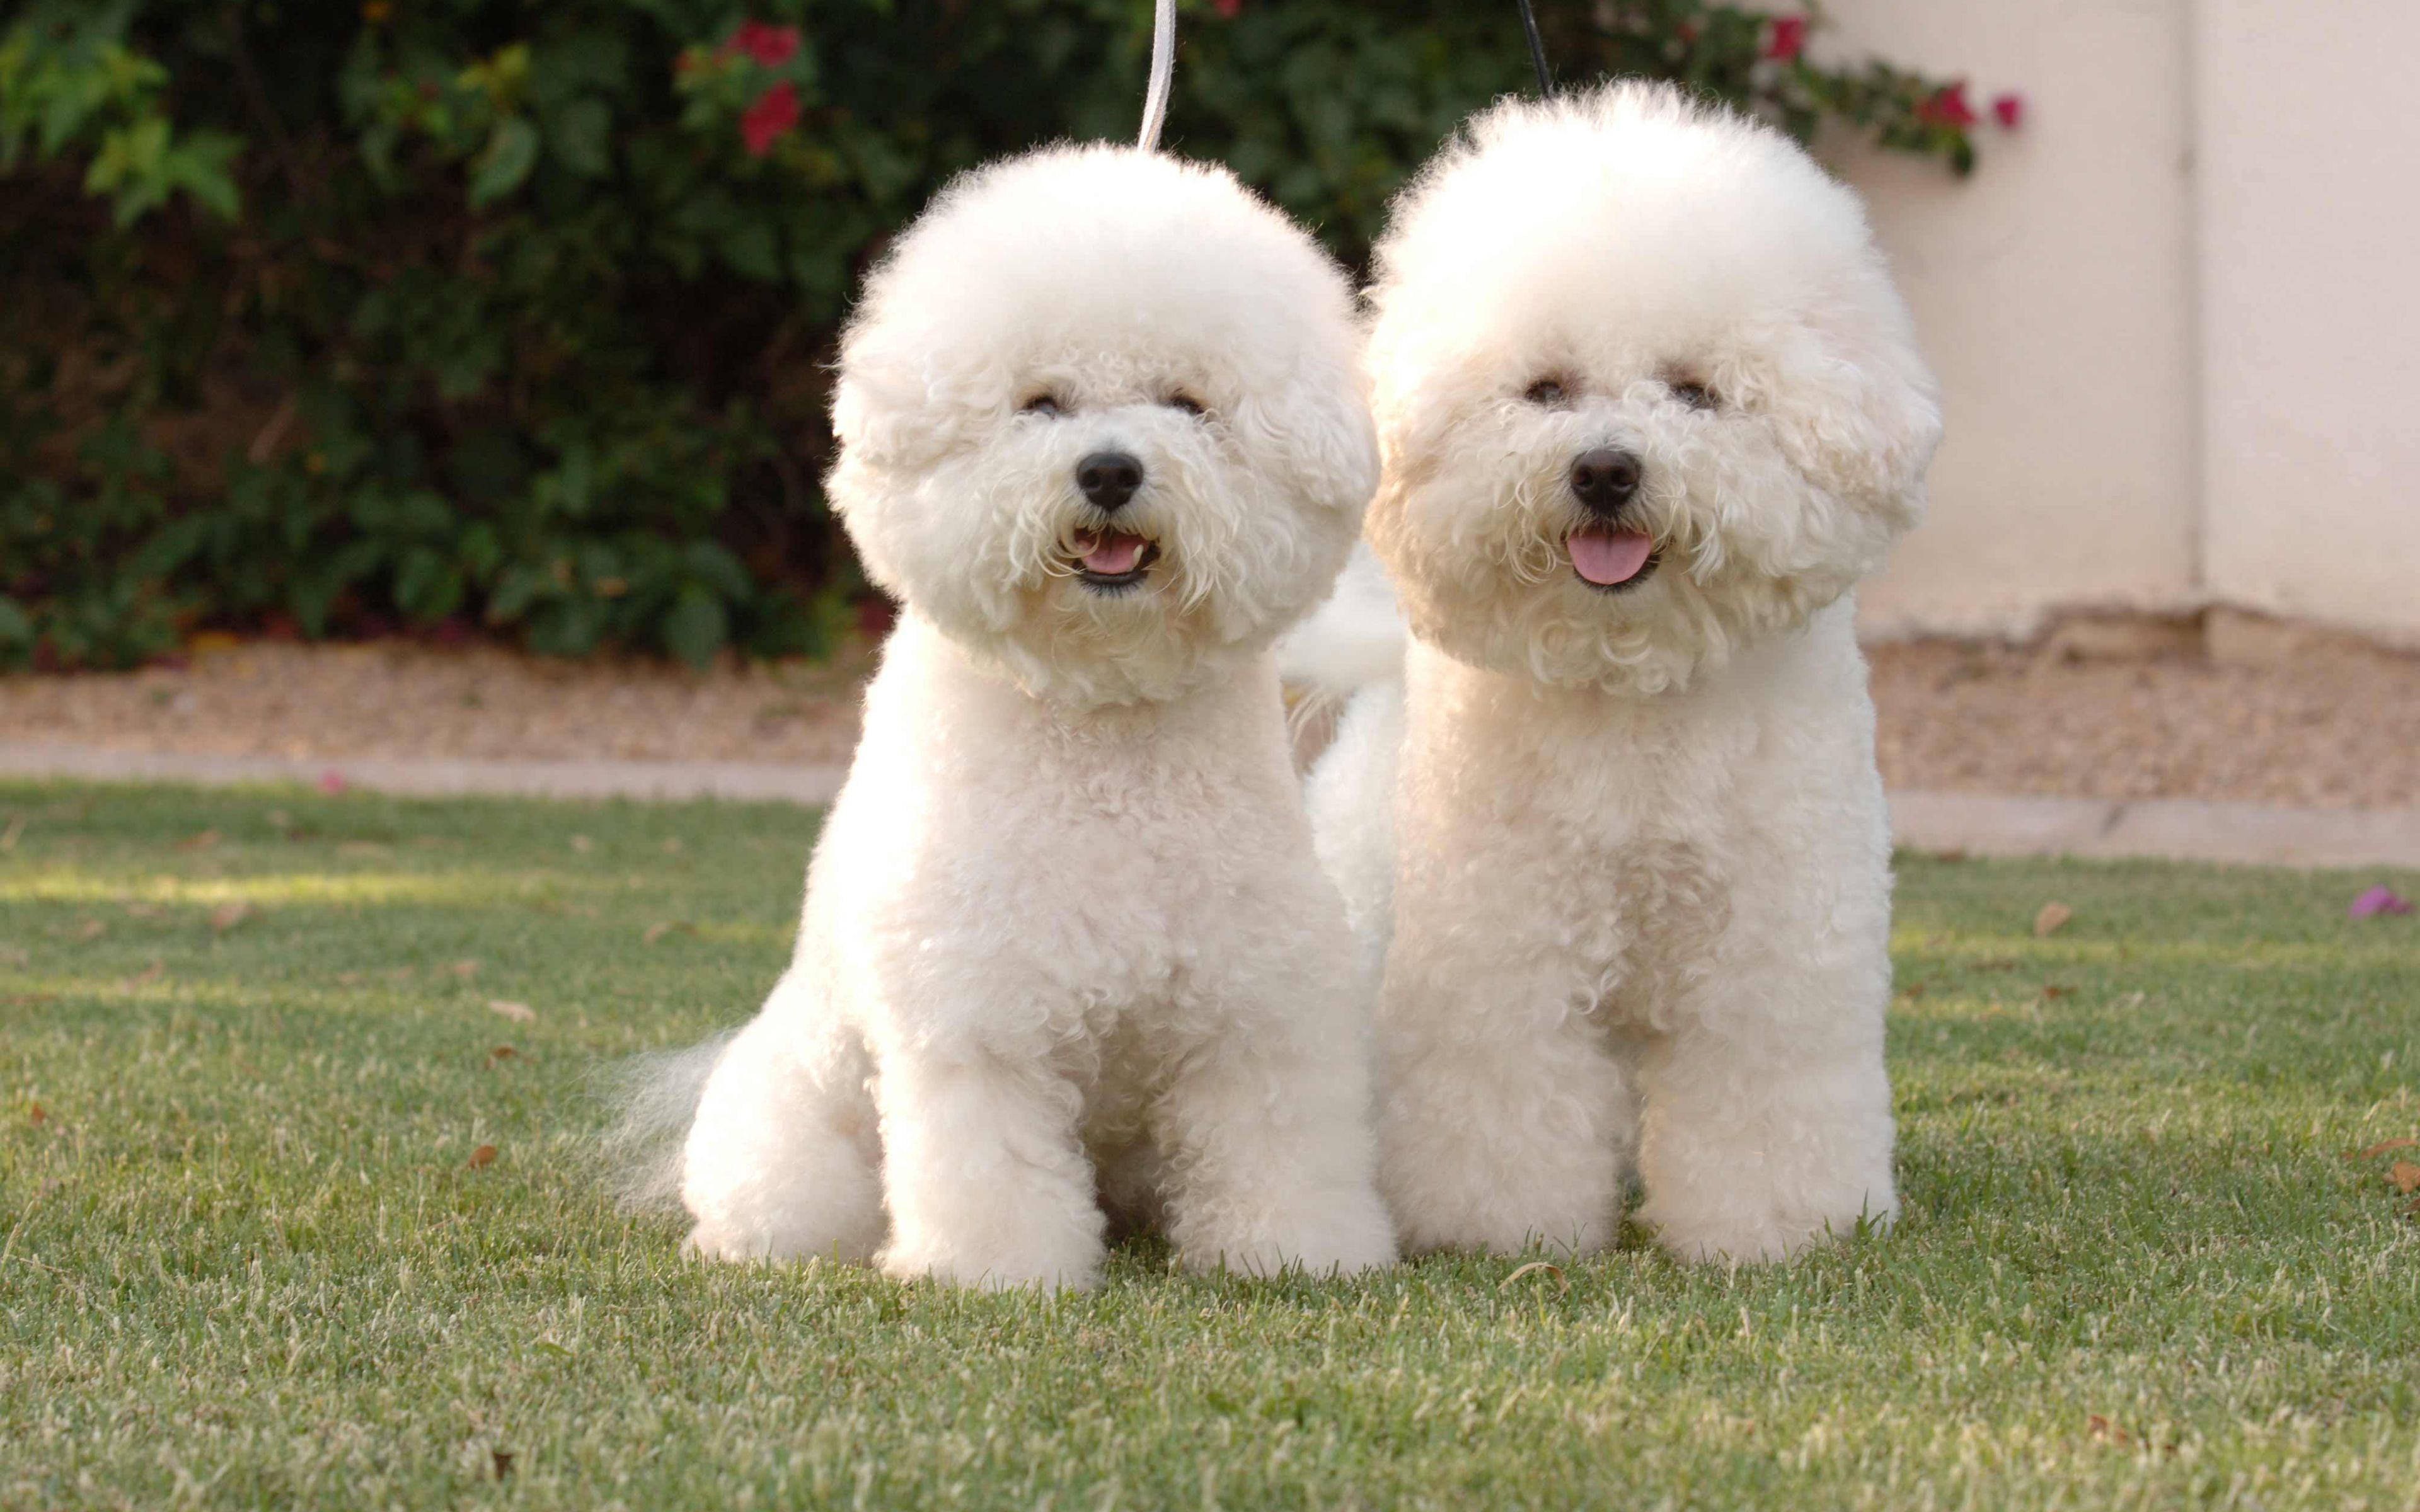 Download wallpaper Bichon Frise Dog, 4к, white fluffy dogs, cute